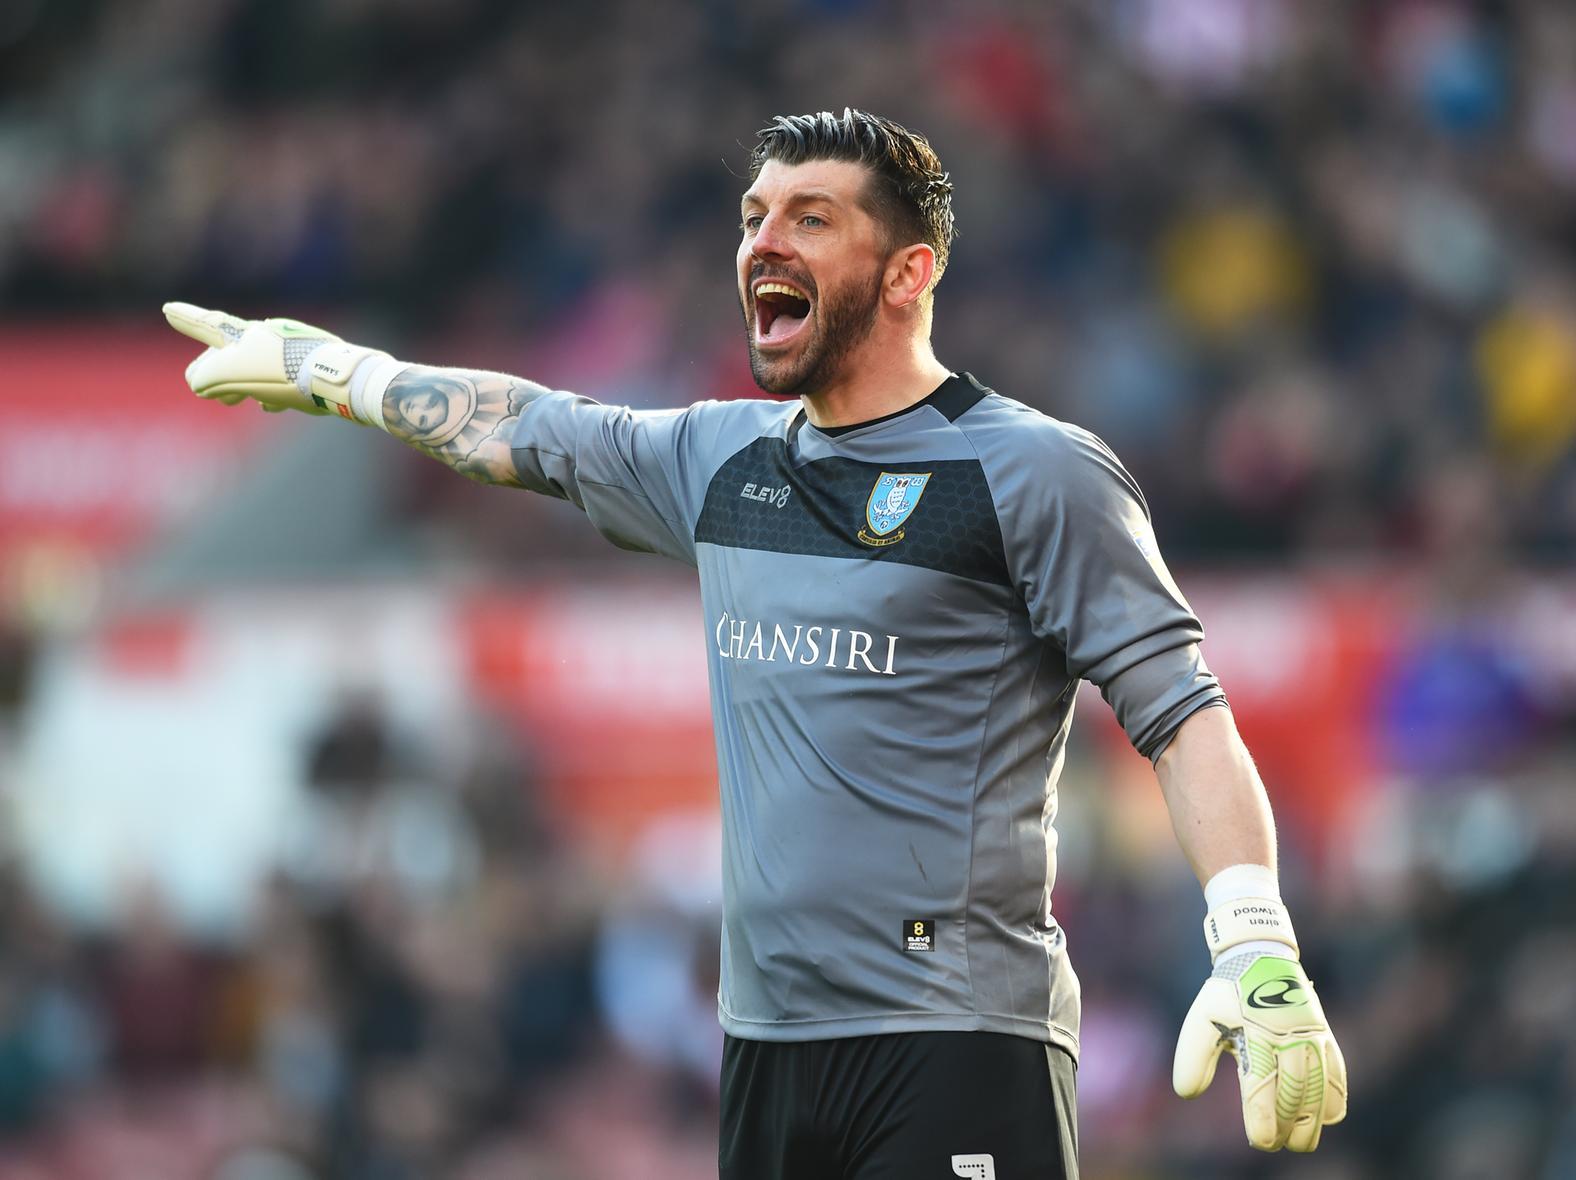 Keiren Westwood (Sheffield Wednesday) - kept United at bay with a string of fine saves. Whites fans know him all too well from over the years.